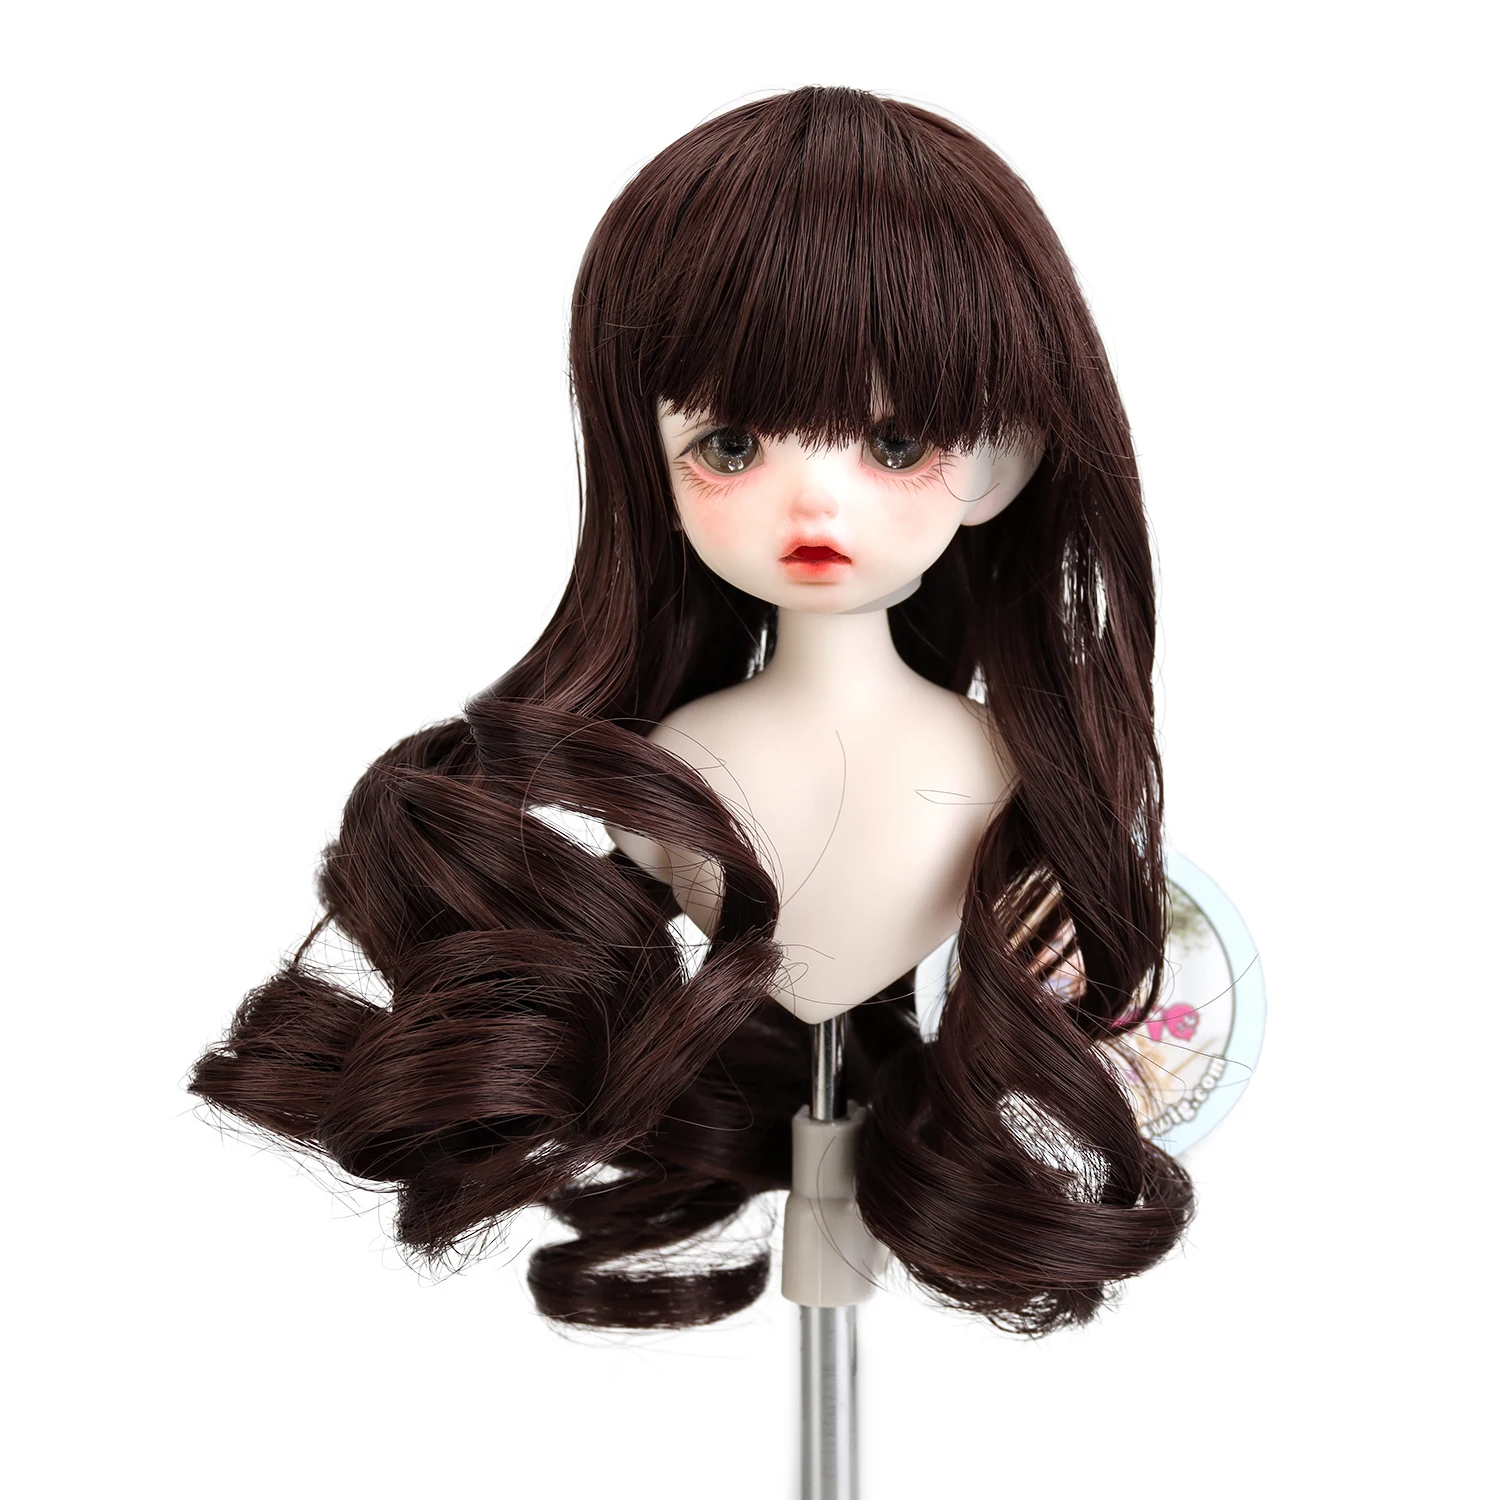 1/6 BJD Doll Wigs 6-7'' Long Curly Natural Color With Bangs MSD DIY Doll Make Accessories Doll Tress Wig Hair factory free shipping 8 9inch 1 3 bjd hair pink long remy smooth synthetic wigswith bangs tress doll accessories